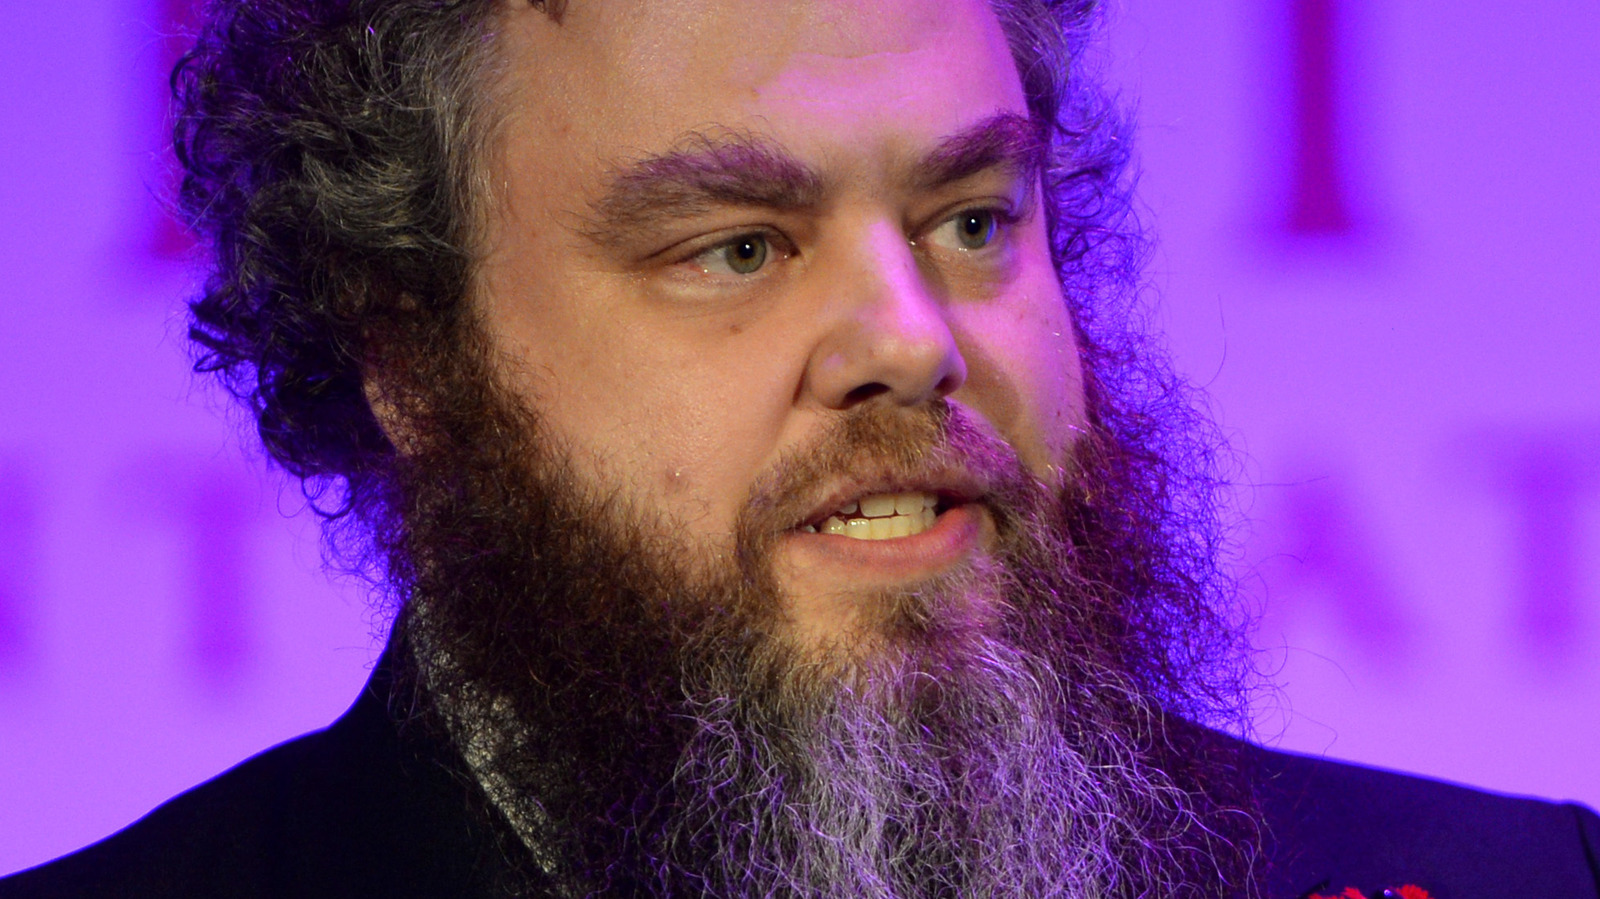 Patrick Rothfuss explains why The Doors of Stone is taking so long to write